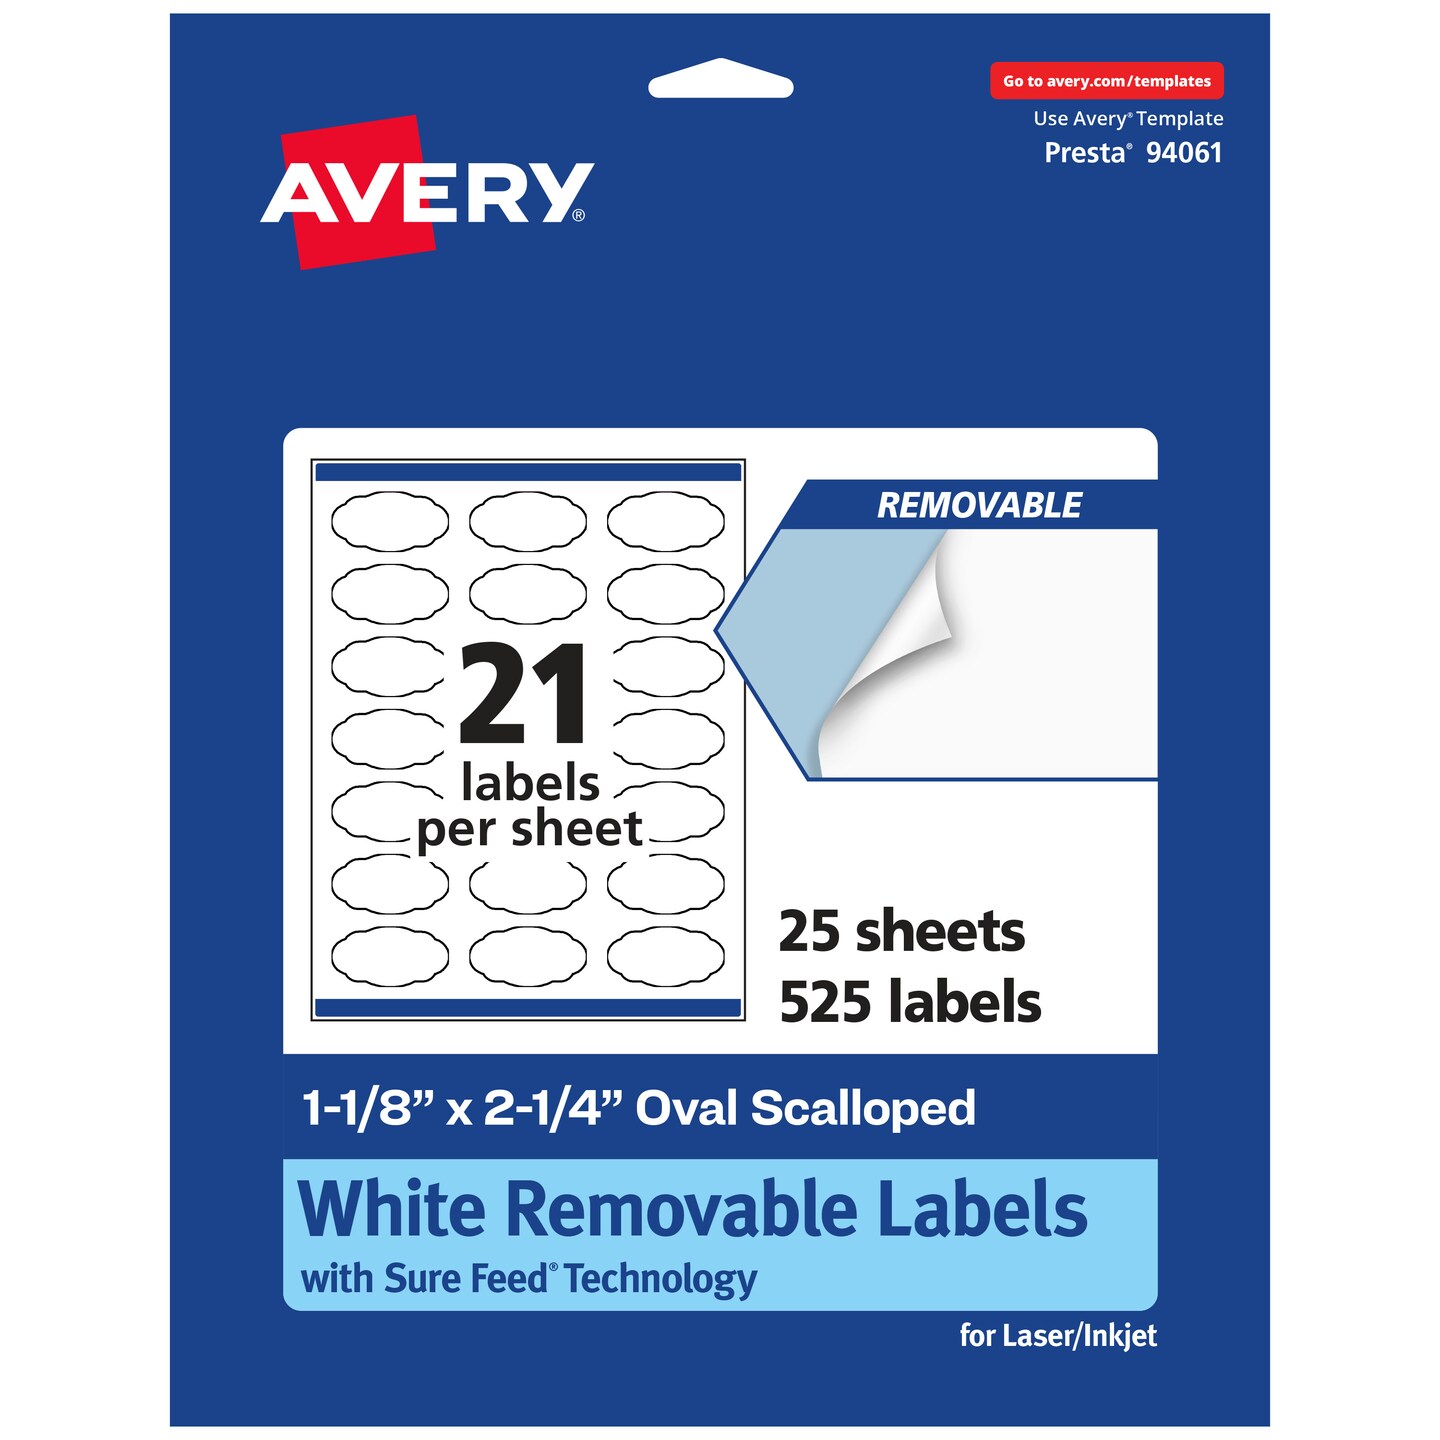 Avery Matte White Removable Oval Scalloped Labels with Sure Feed Technology, Print-to-the-Edge, 1-1/8" x 2-1/4"